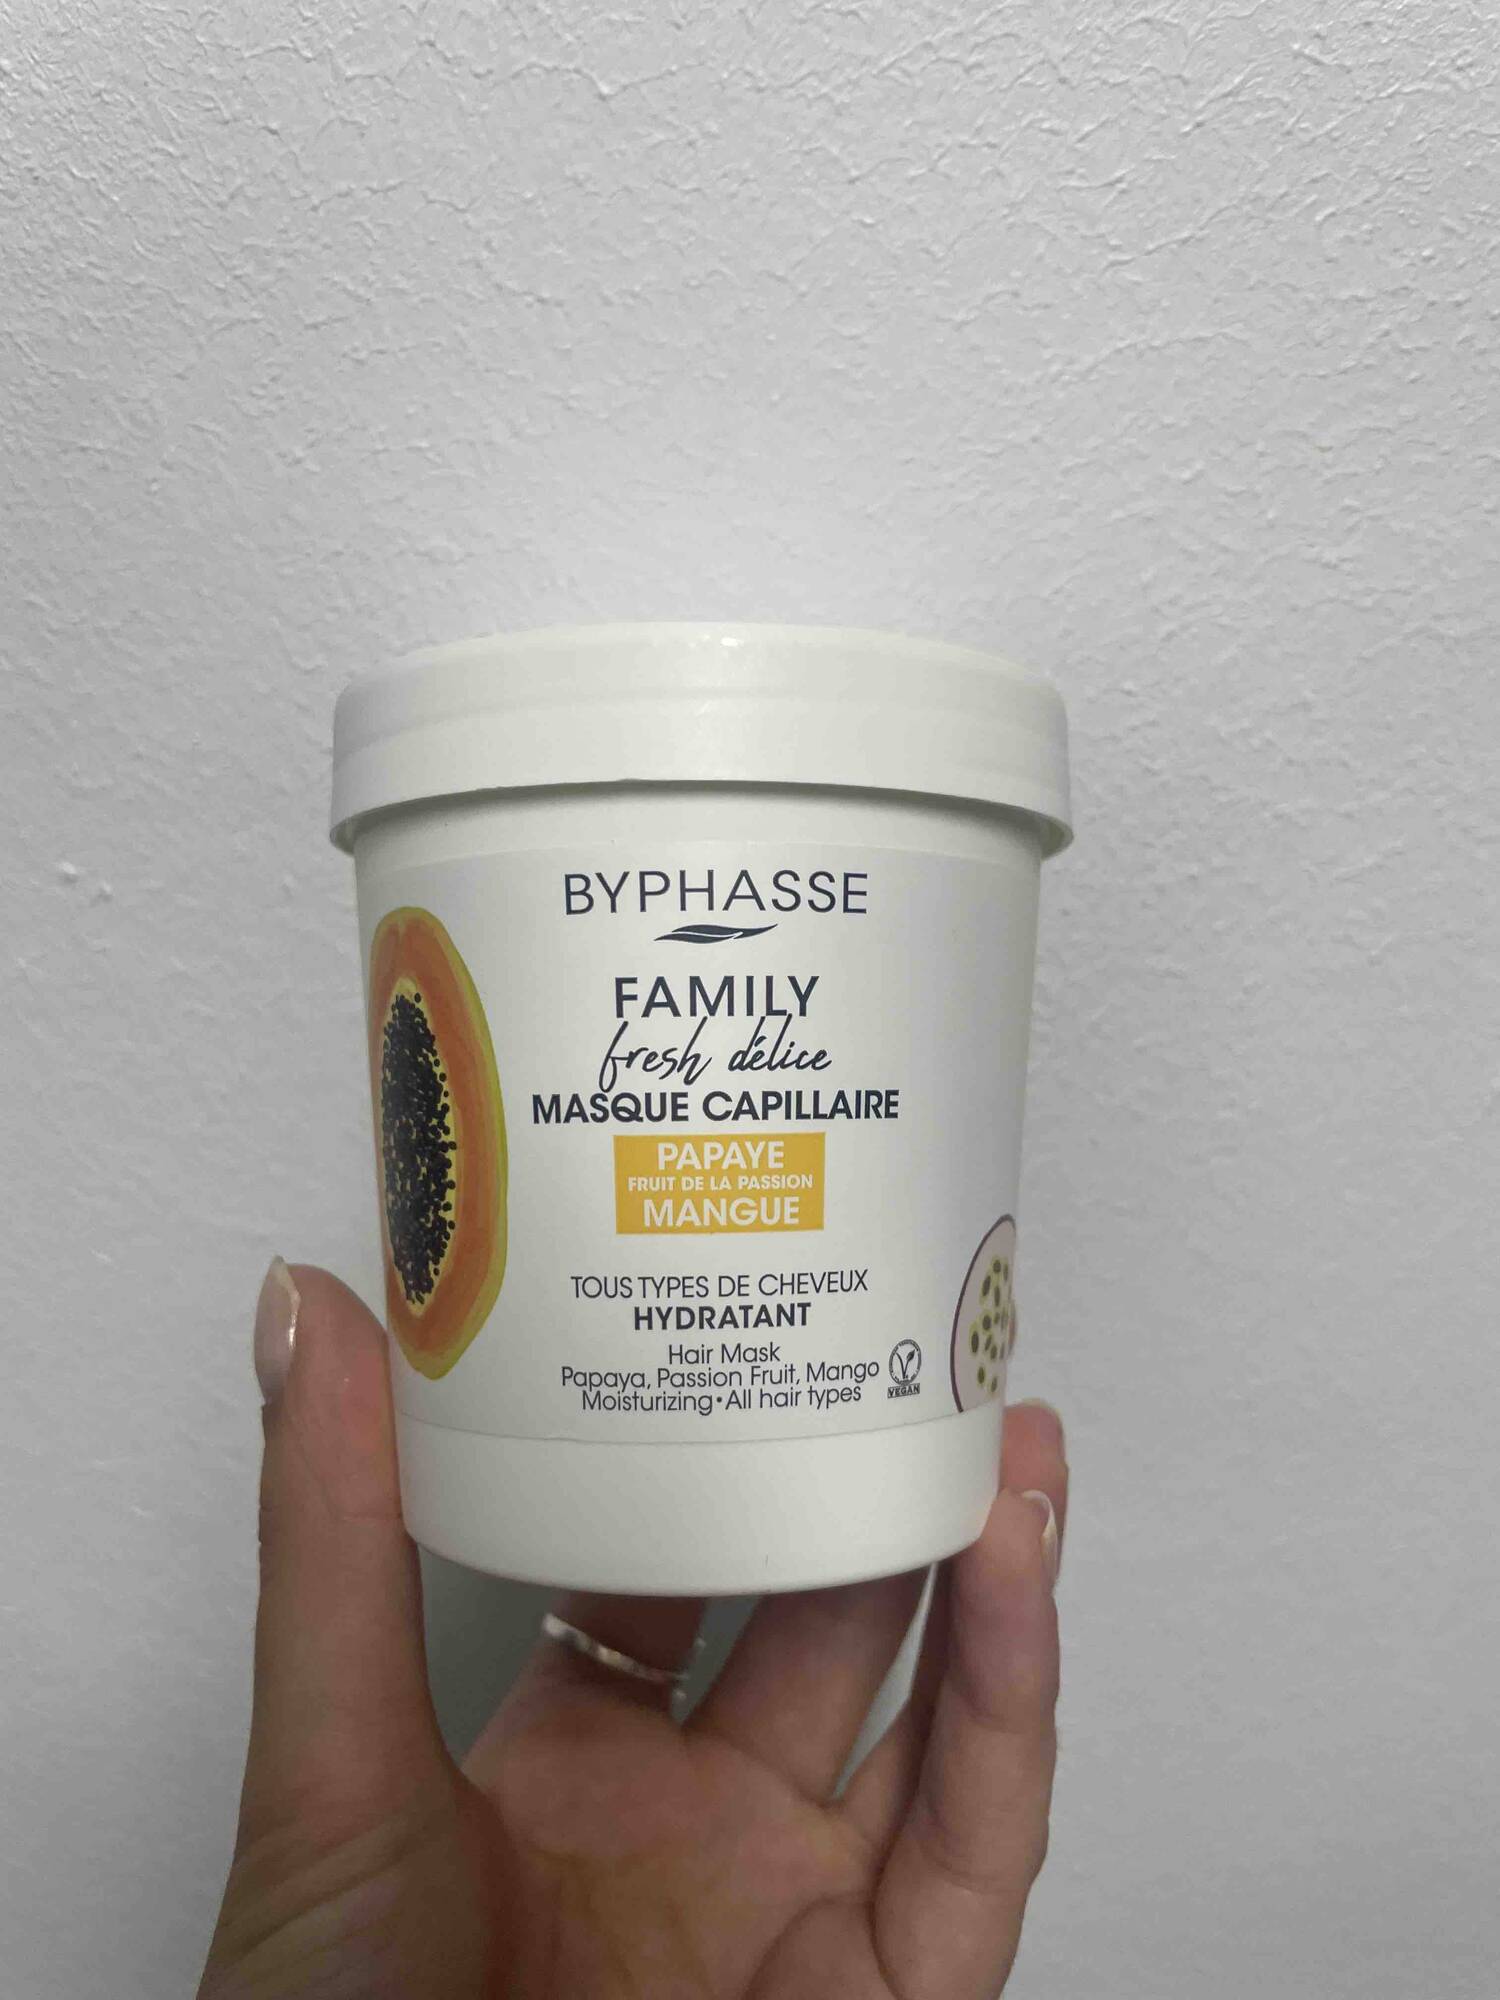 BYPHASSE - Family masque capillaire papaye mangue